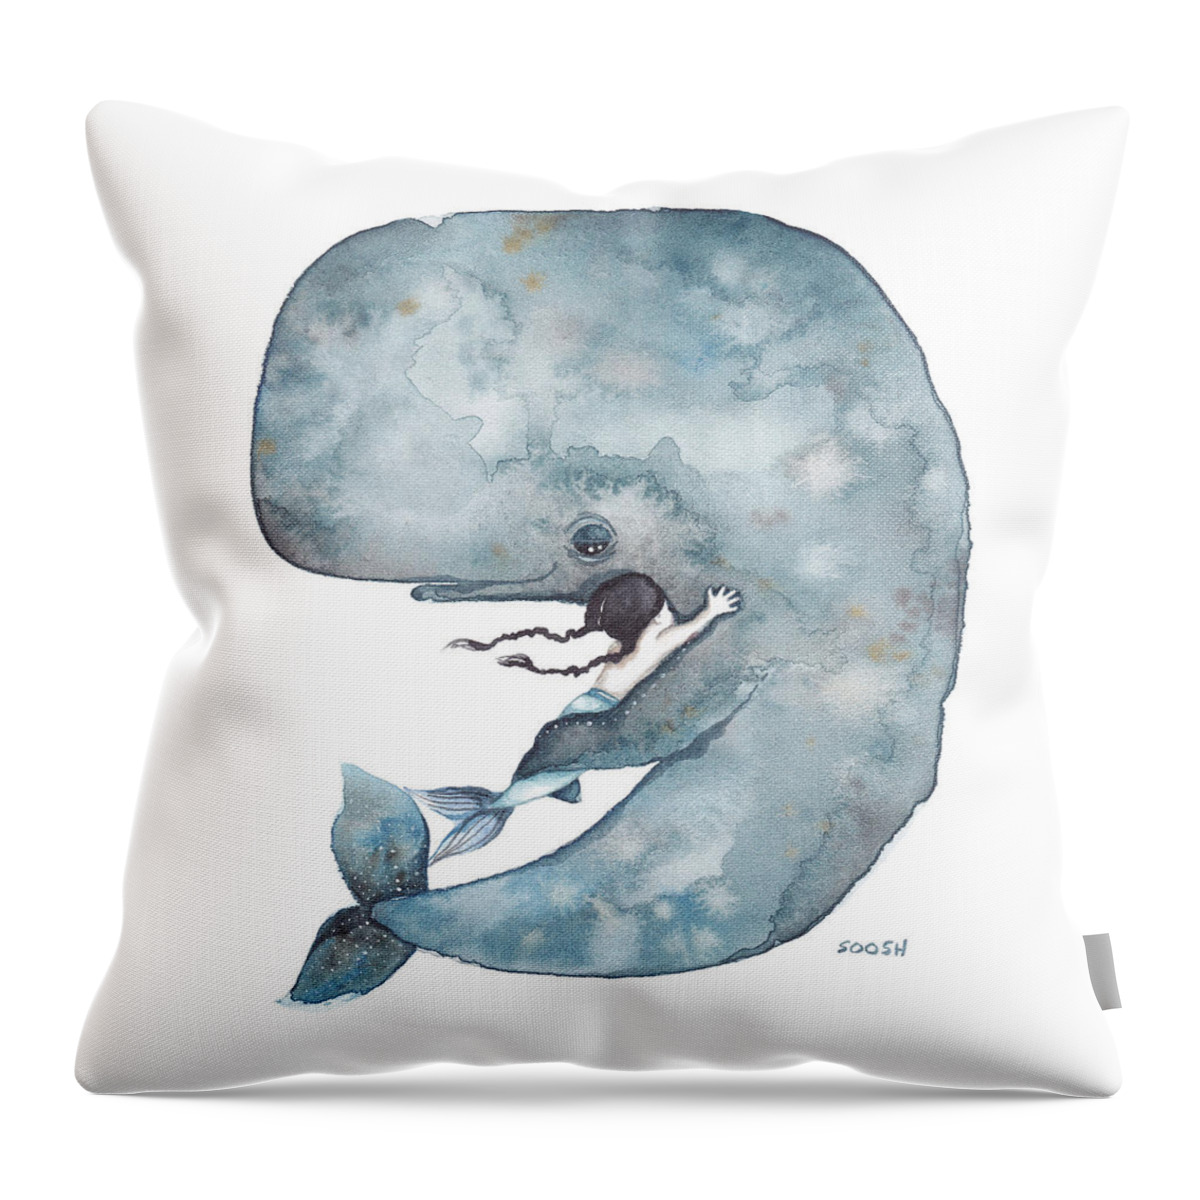 #faatoppicks Throw Pillow featuring the painting My Whale by Soosh 